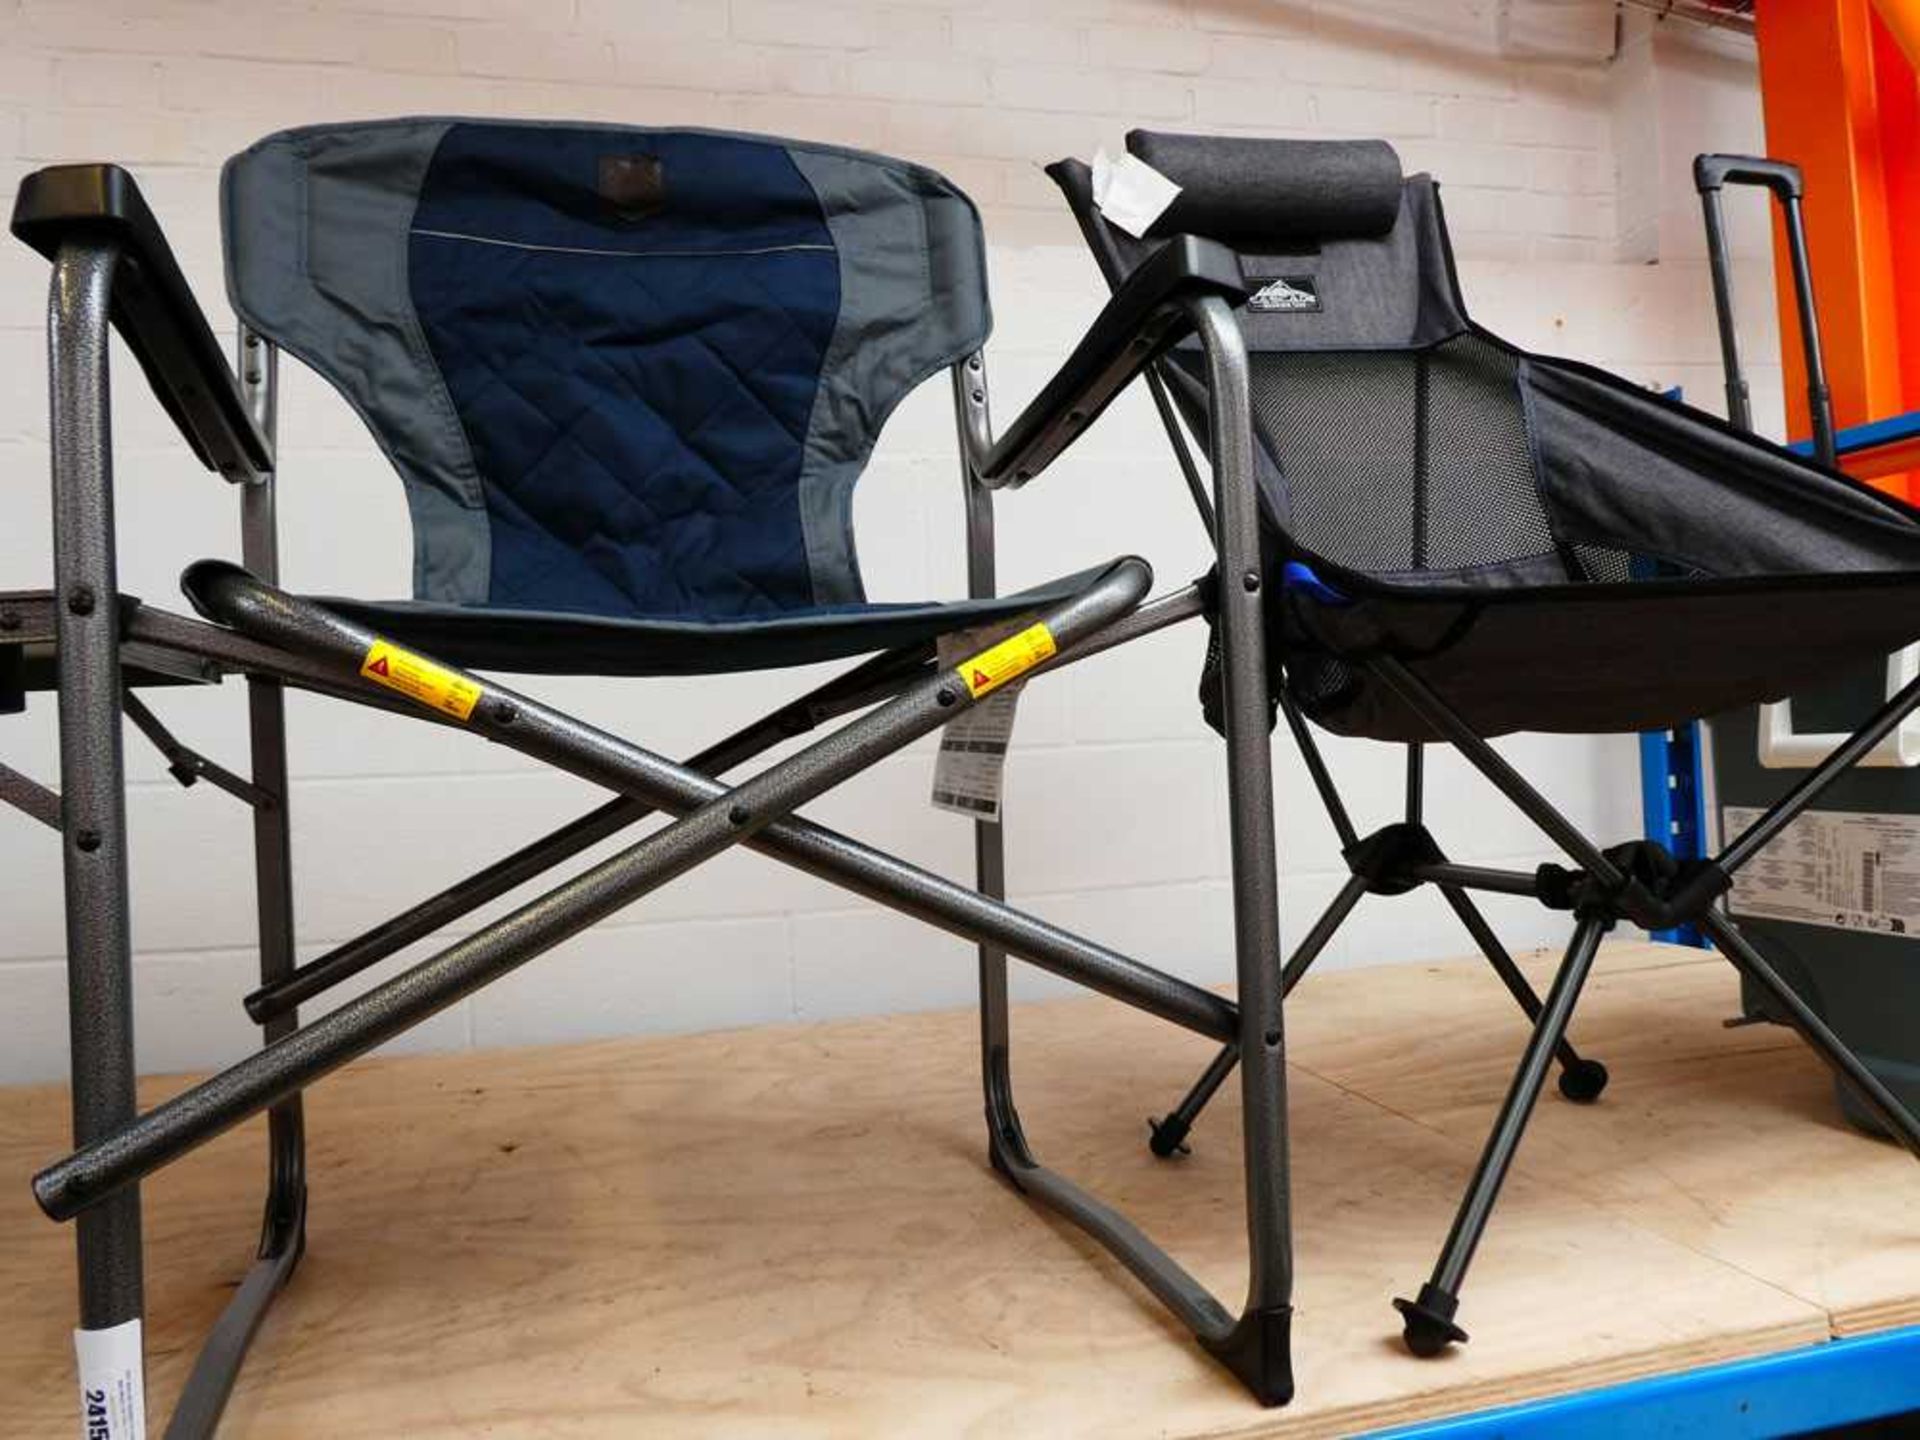 +VAT Timber Ridge collapsible camping chair with integrated side table with Cascade camping chair